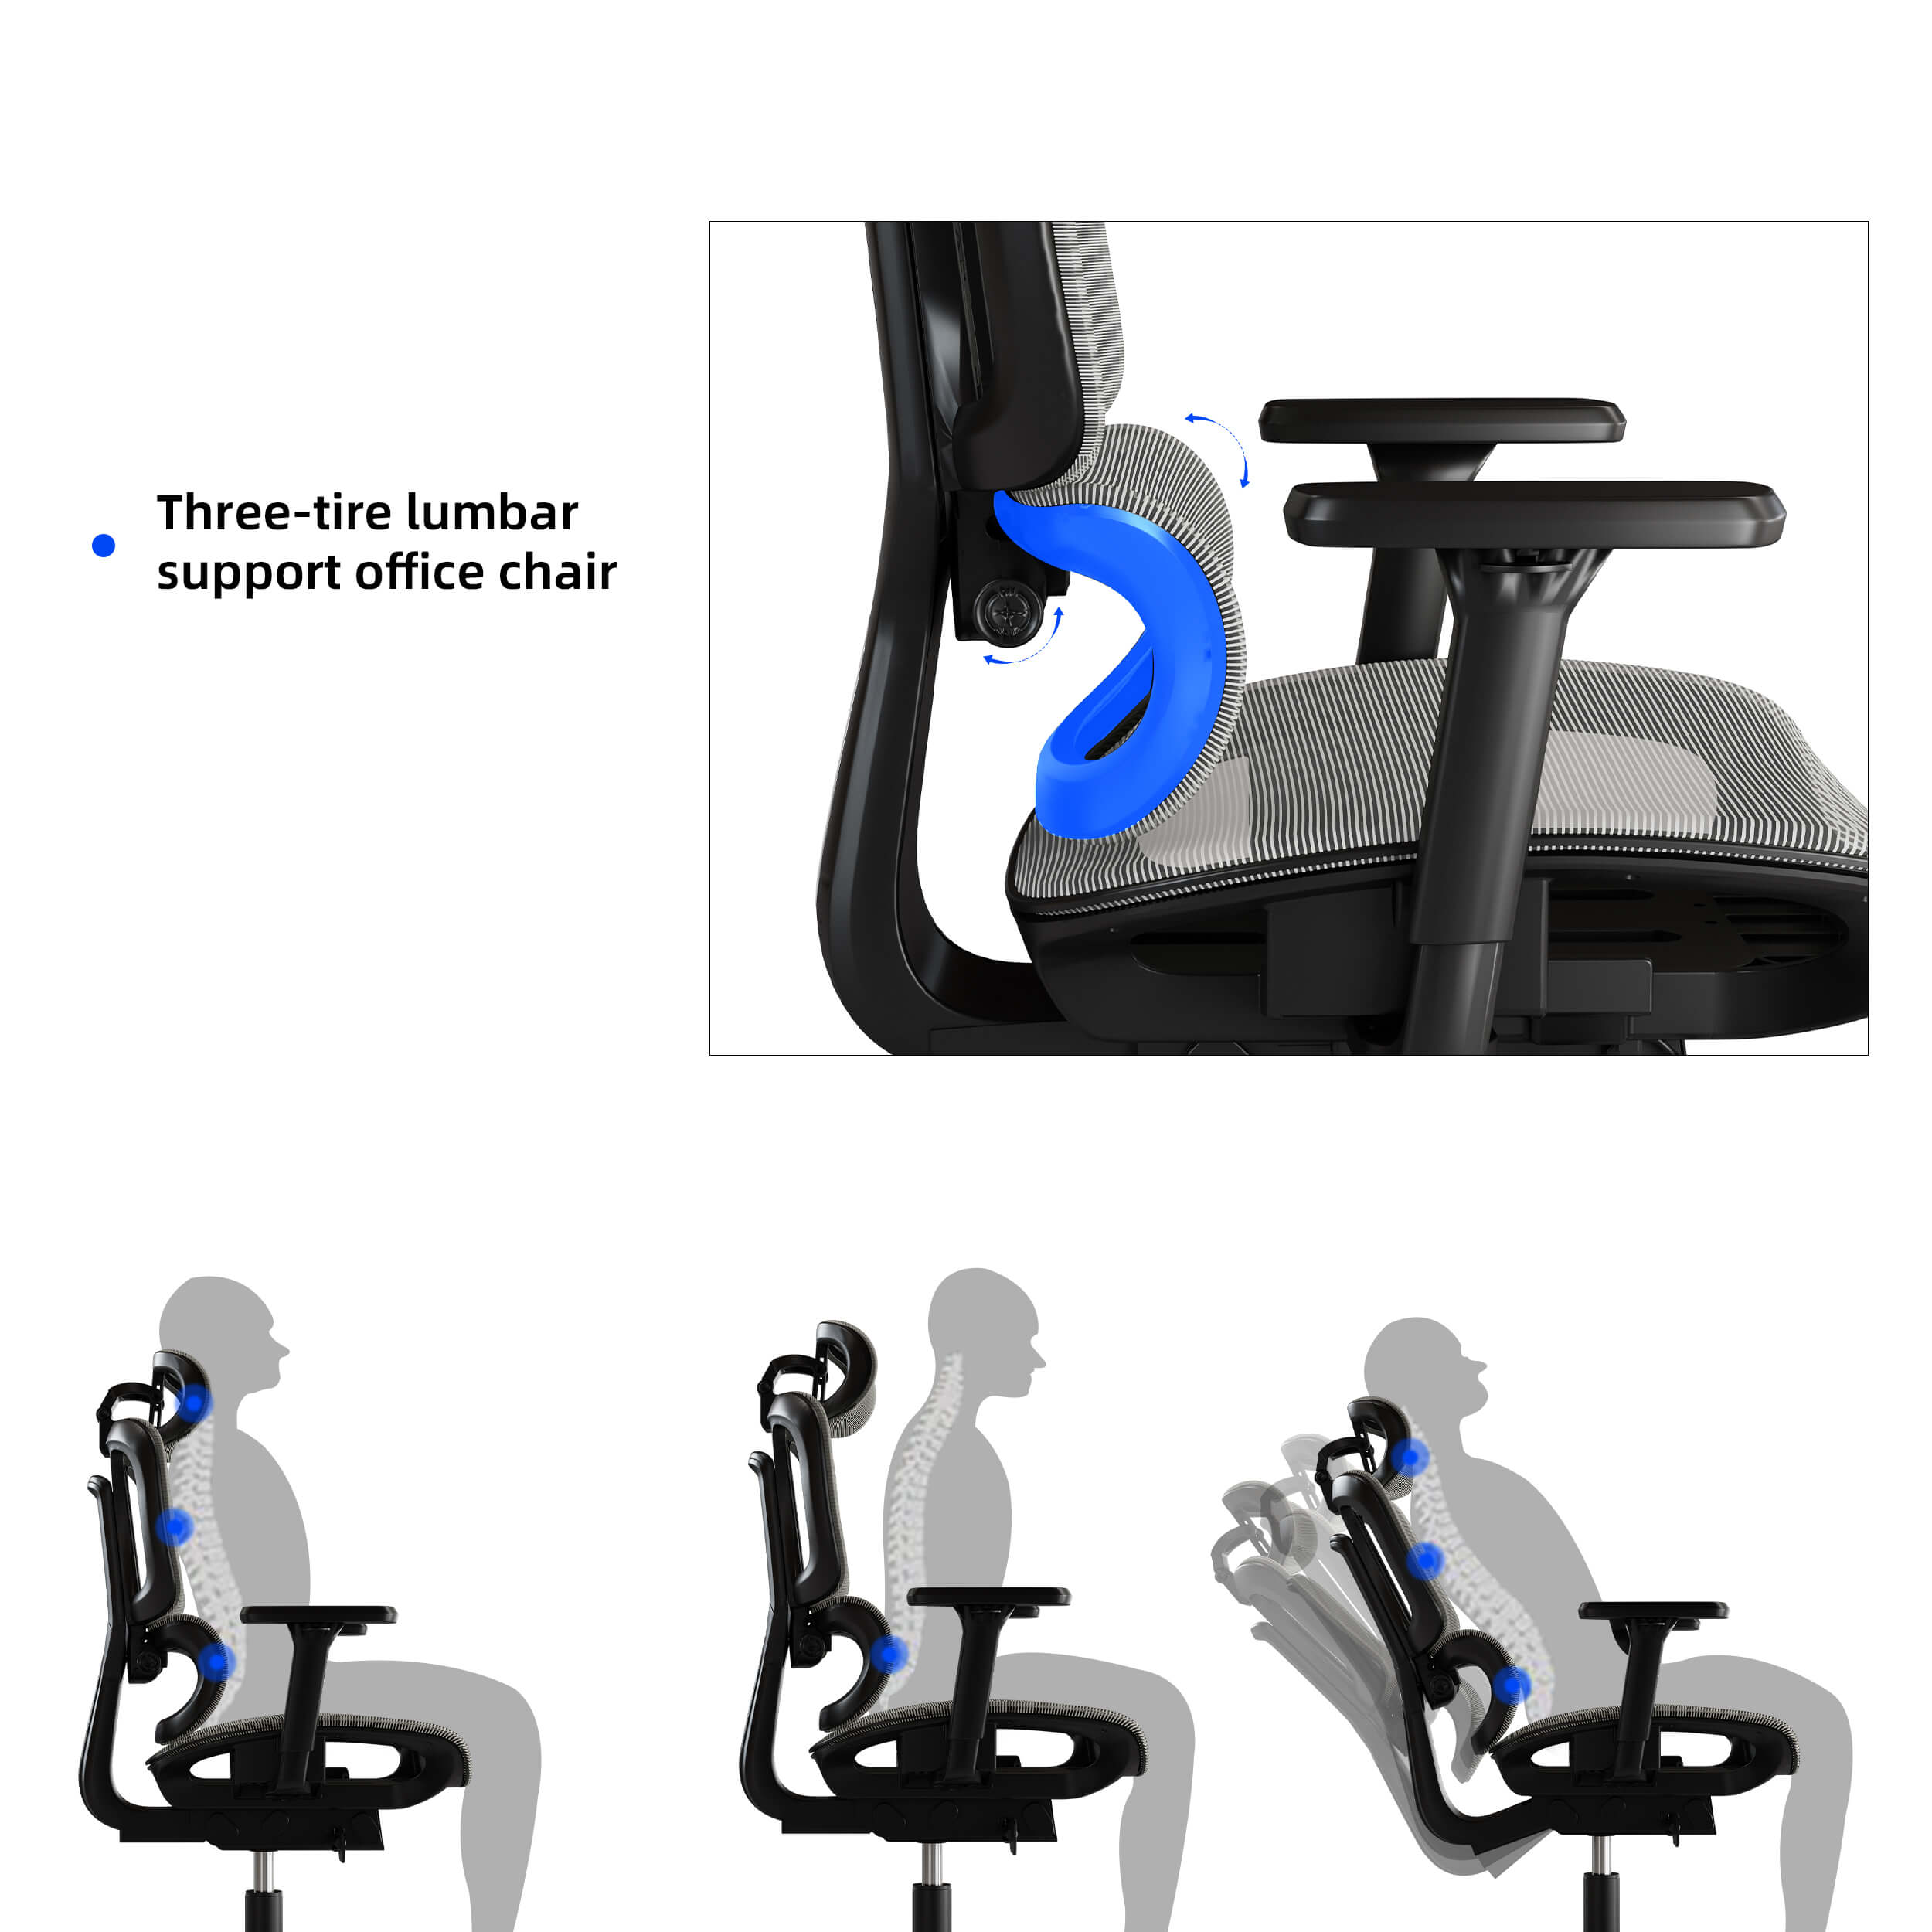 Maidesite ergonomic office chair with 3-tire lumbar support for people comfort work